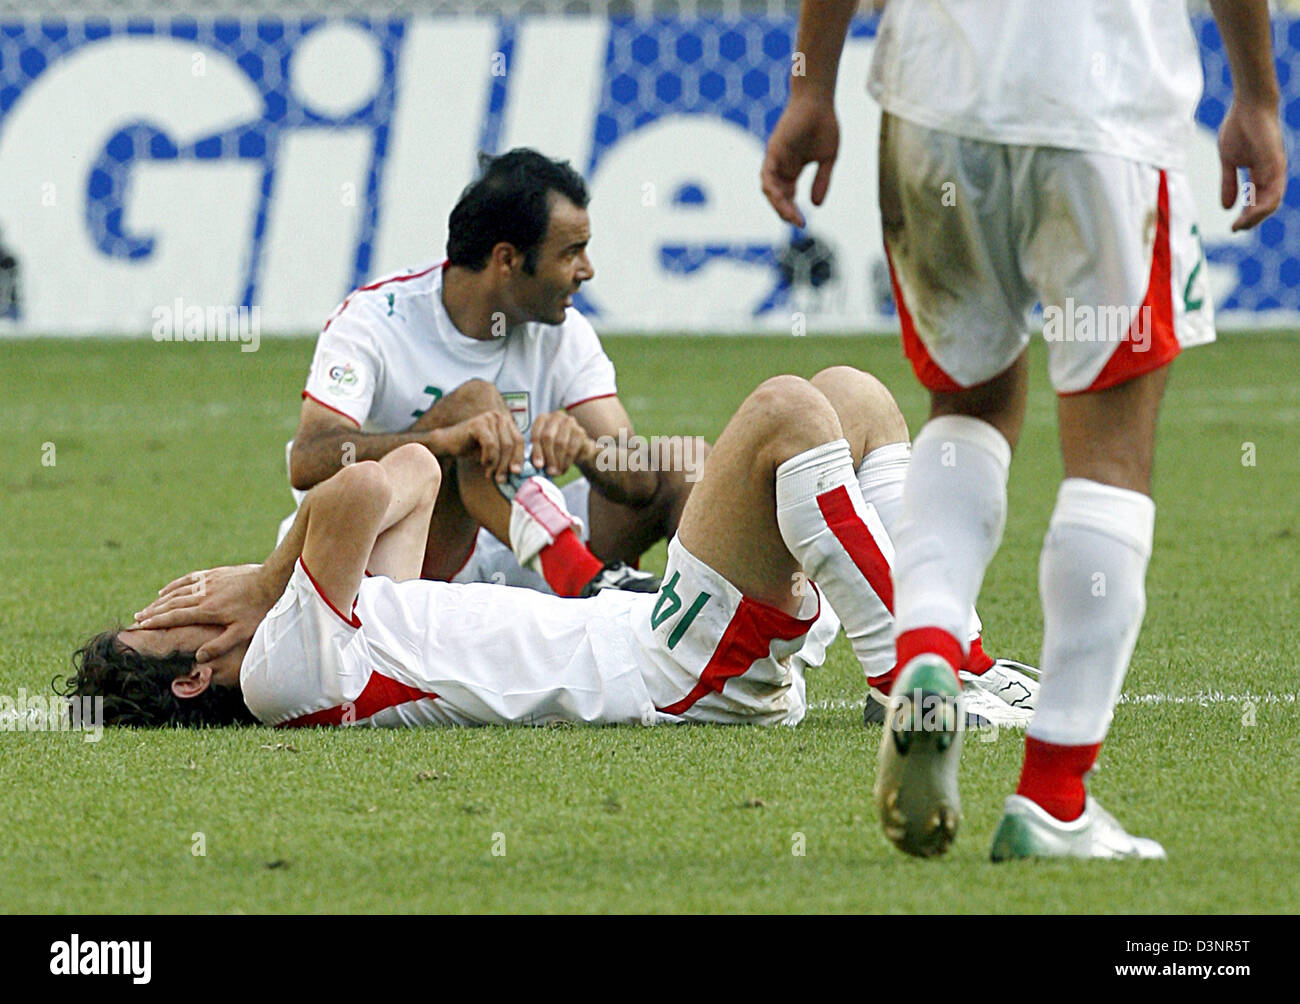 Andranik Teymourian (L) and Sohrab Bakhtiarizade of Iran lay on the ground after the group D preliminary match of 2006 FIFA World Cup Iran vs. Angola at the FIFA World Cup stadium in Leipzig, Germany, Wednesday, 21 June 2006. The match ended with a 1-1 tie. DPA/WOLFGANG KUMM +++ Mobile Services OUT +++ Please refer to FIFA's Terms and Conditions. Stock Photo